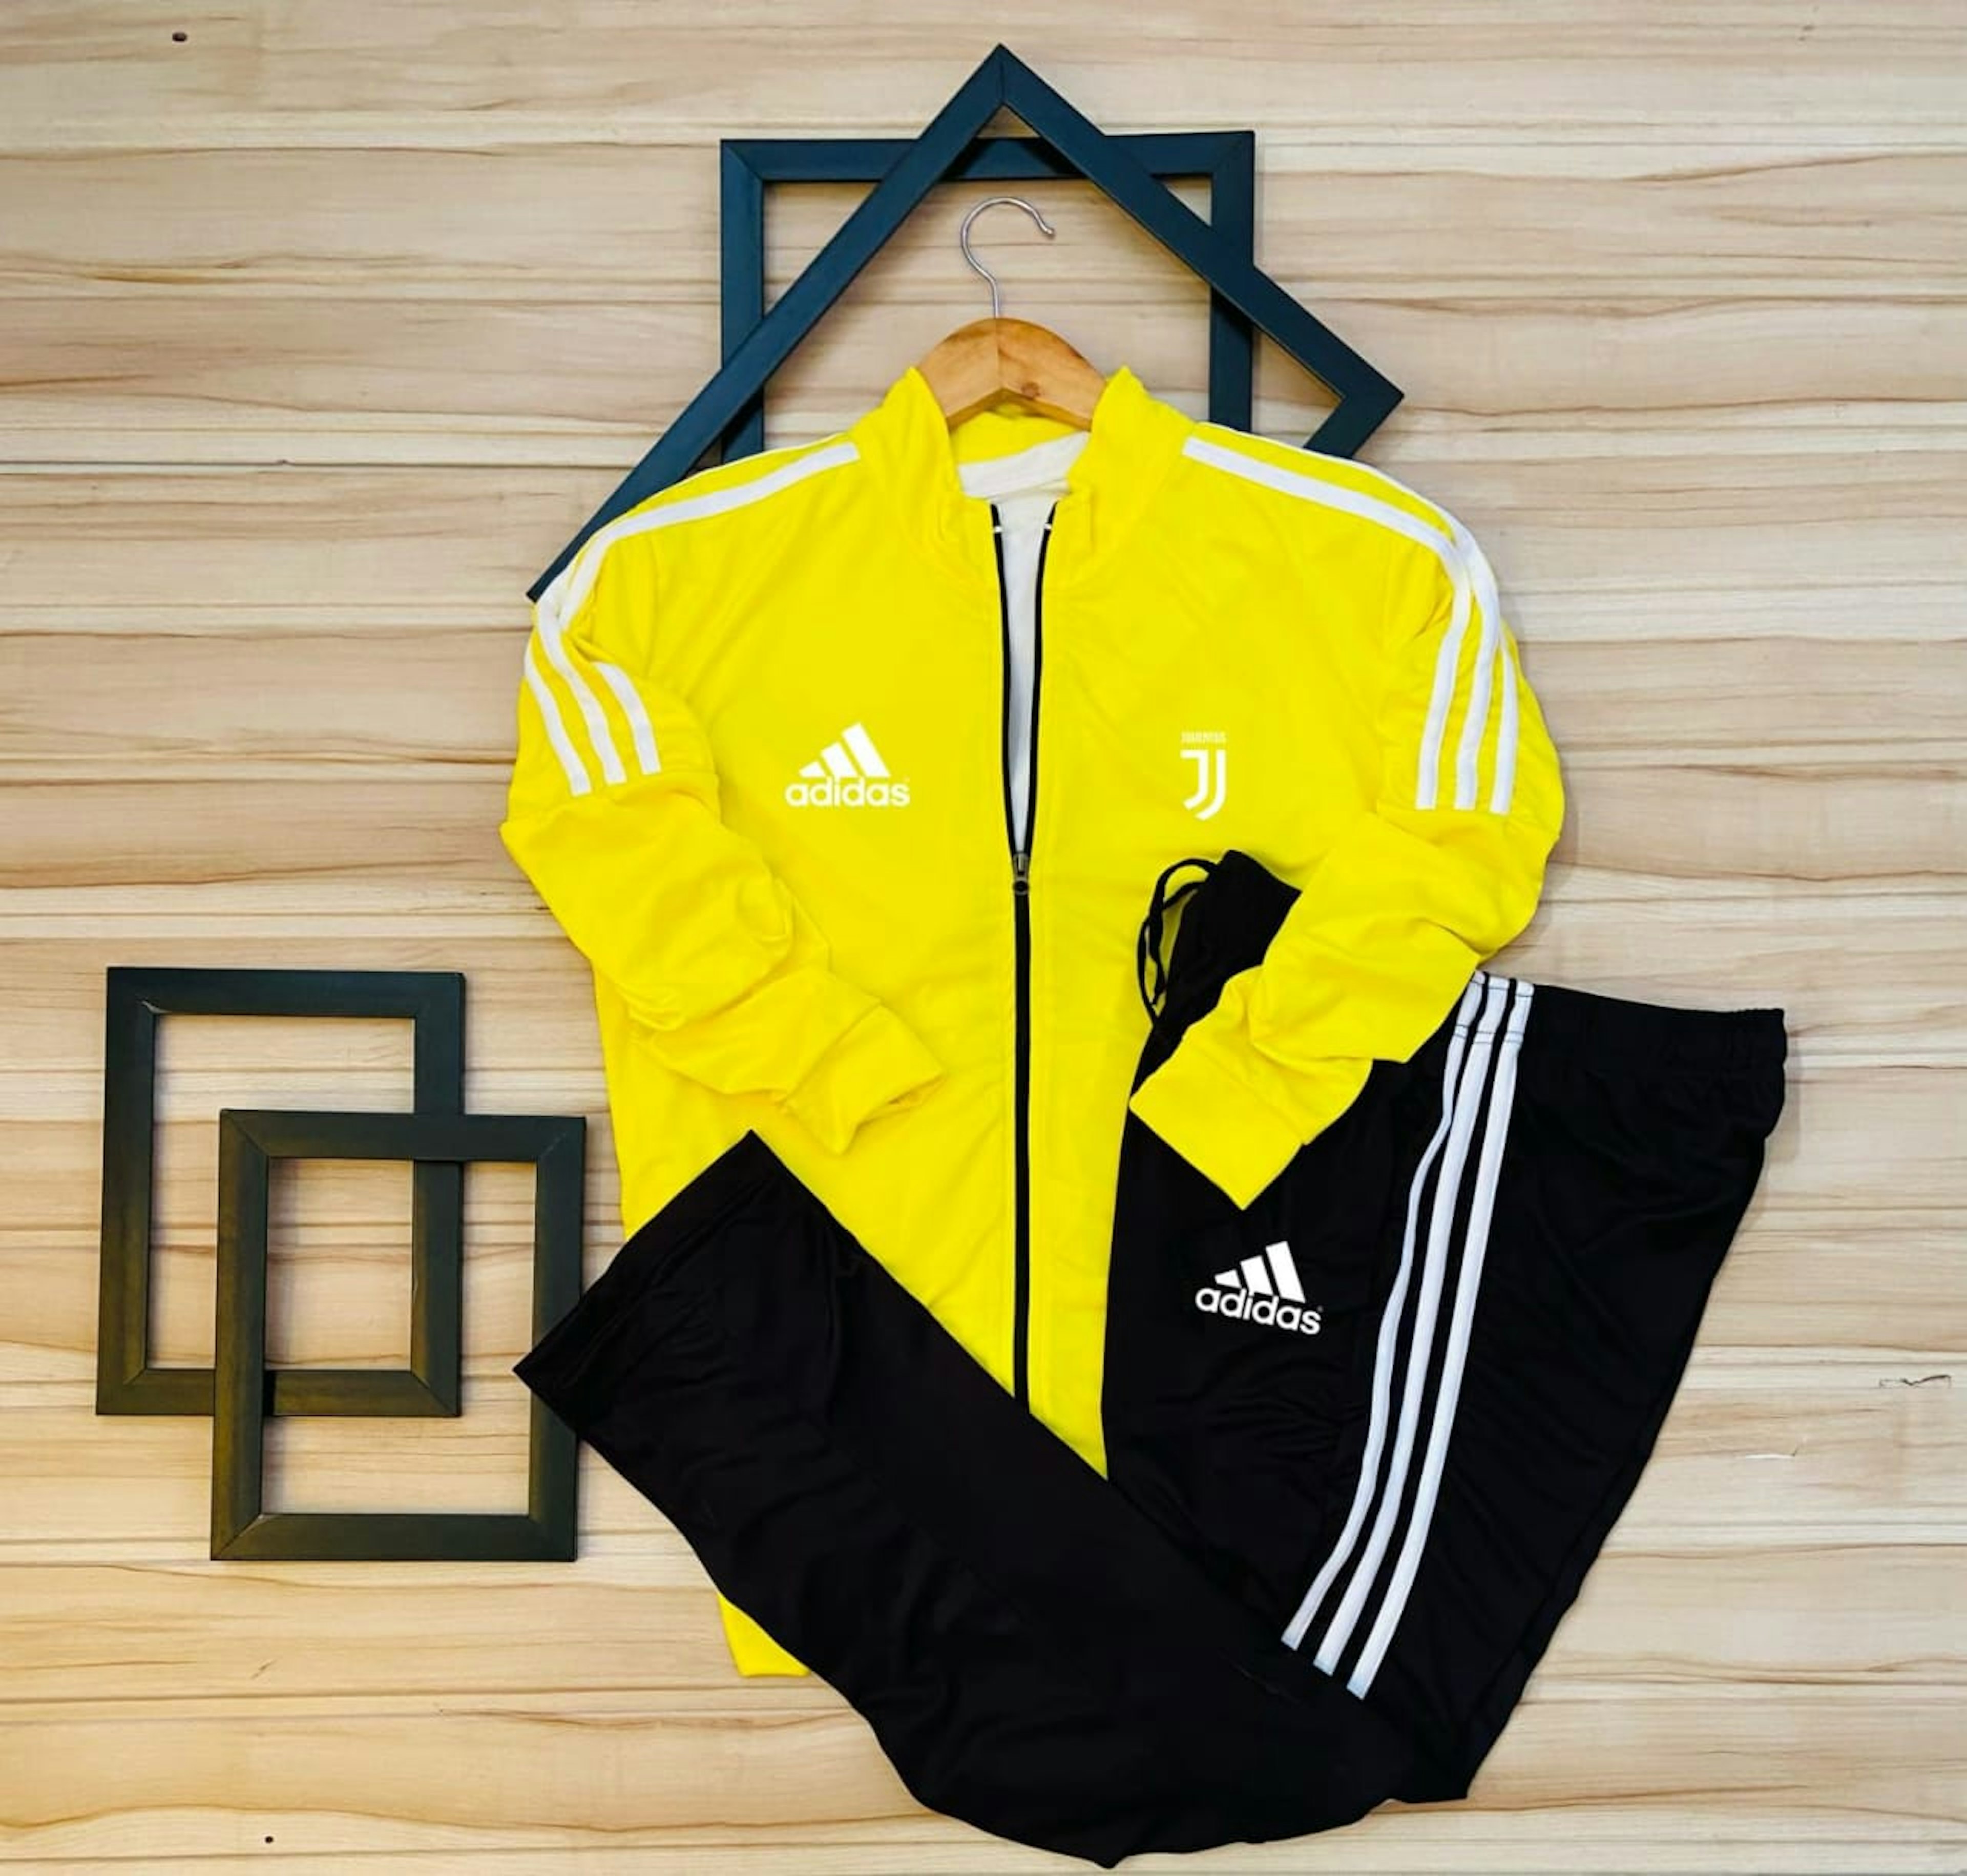 View - Adidas Tracksuit photos, Adidas Tracksuit available in Surat, make deal in 600